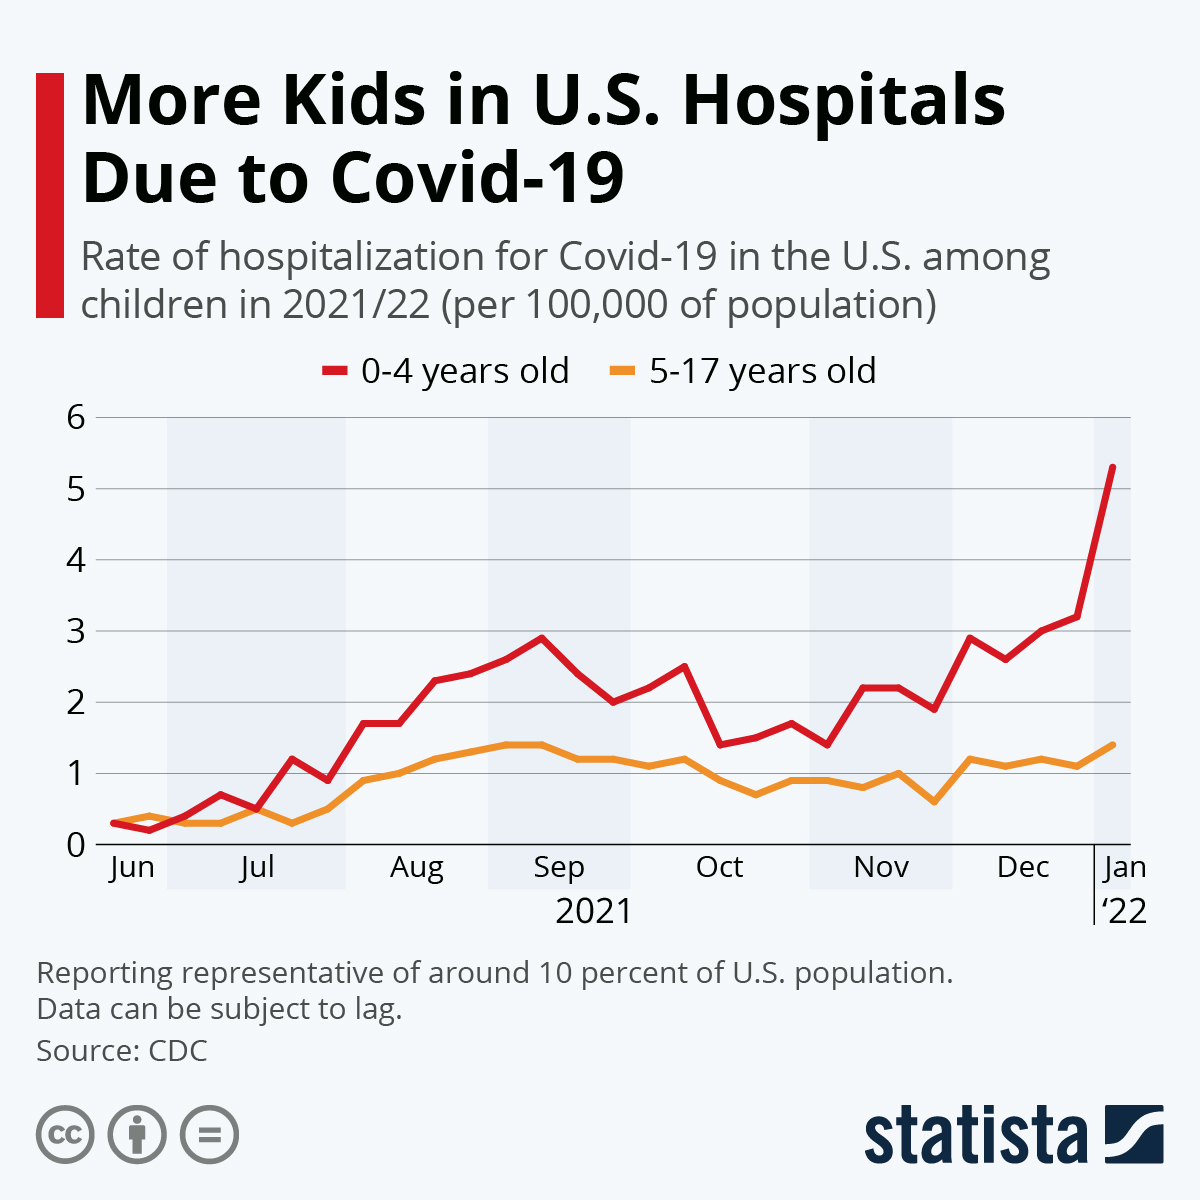 More Kids in U.S. Hospitals Due to COVID-19